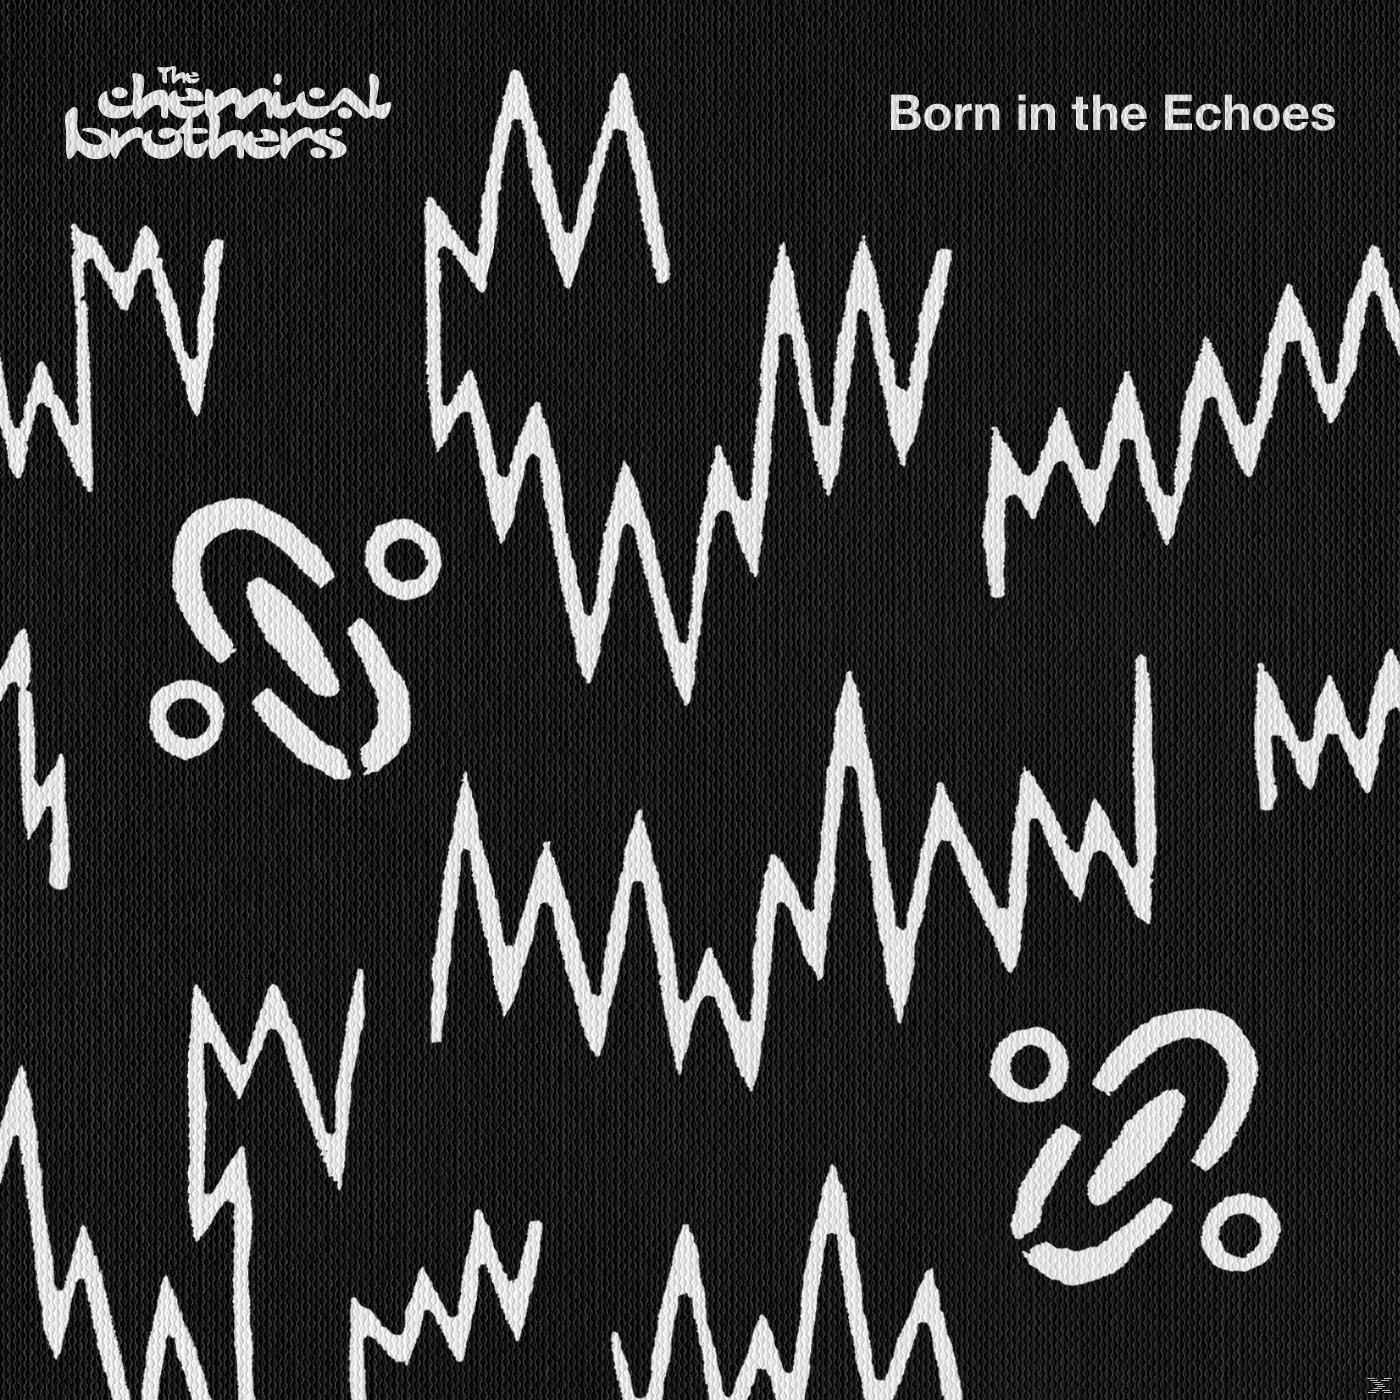 The Born In (CD) Brothers - - Echoes Chemical The